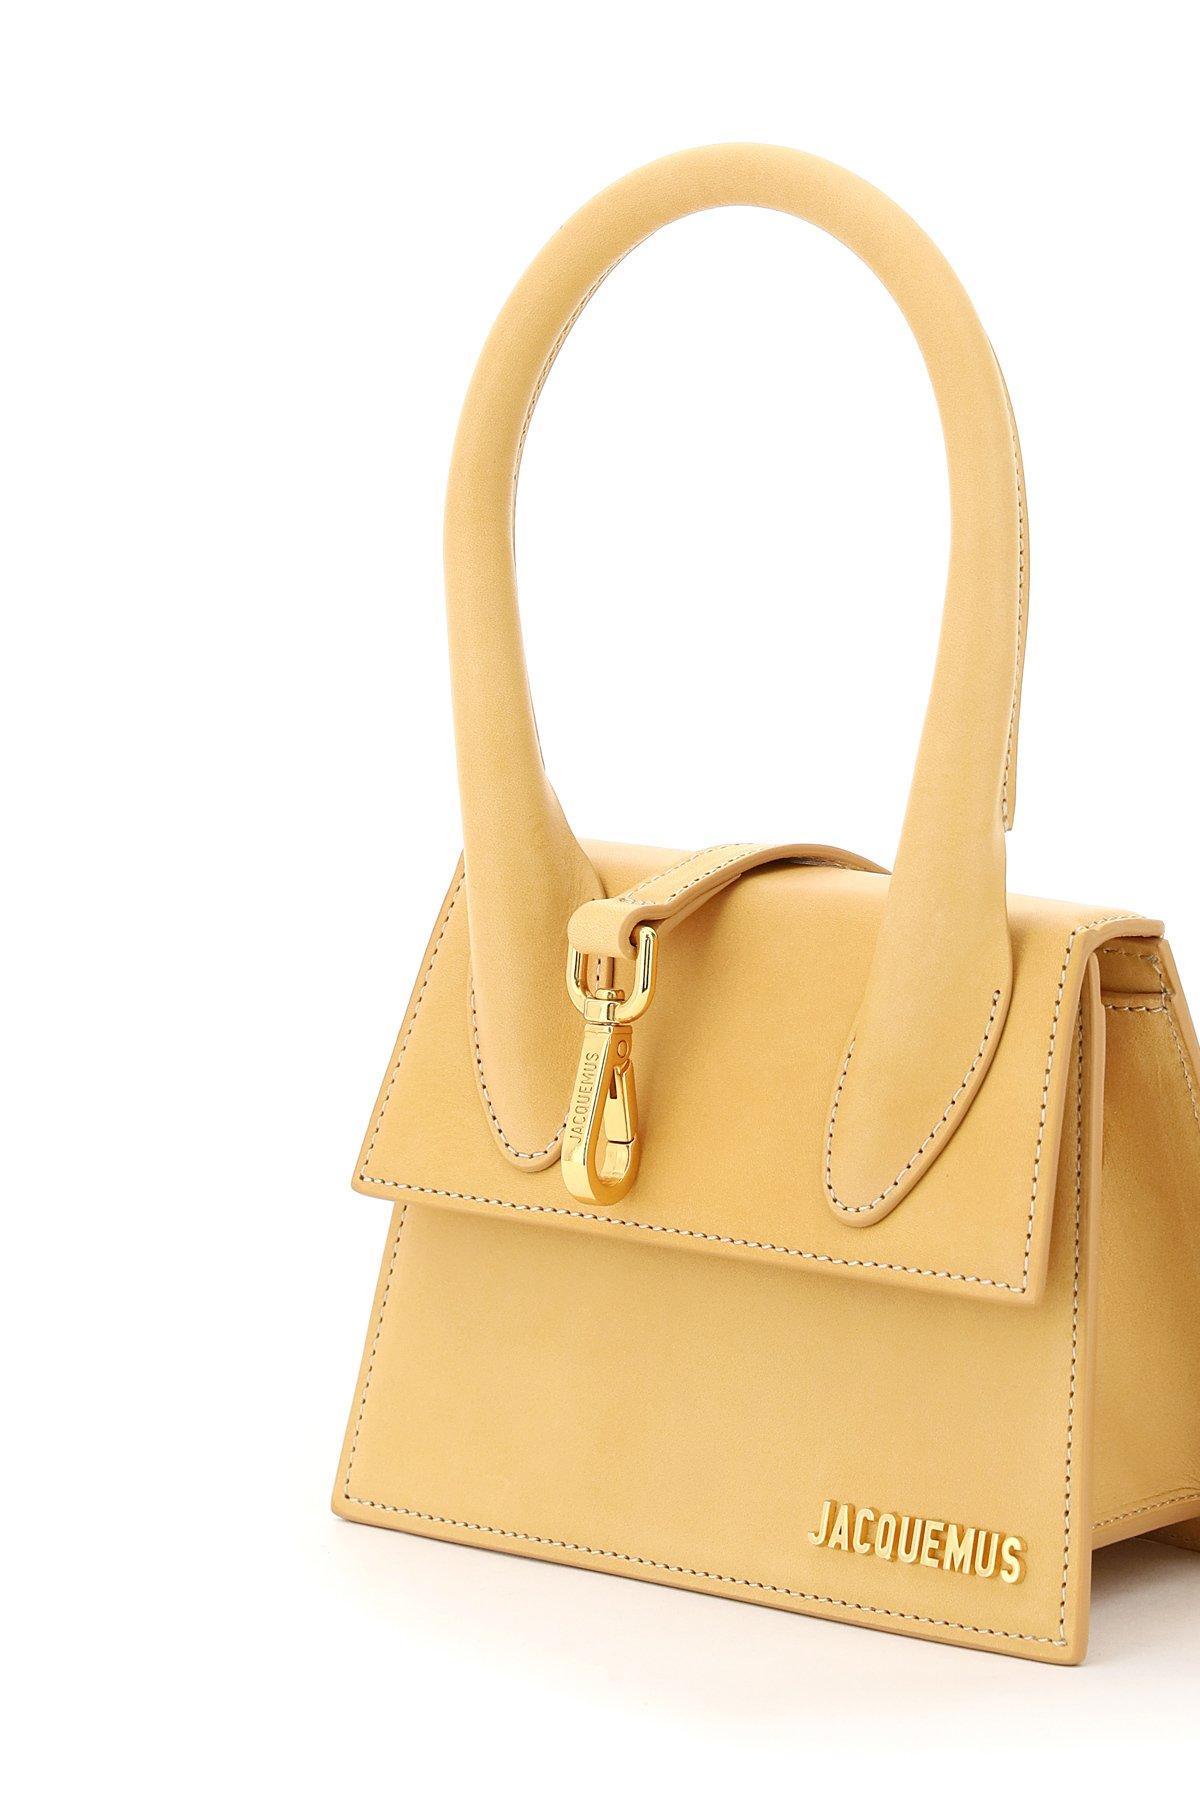 Jacquemus Suede Le Chiquito Moyen Top Handle Bag in Yellow - Lyst